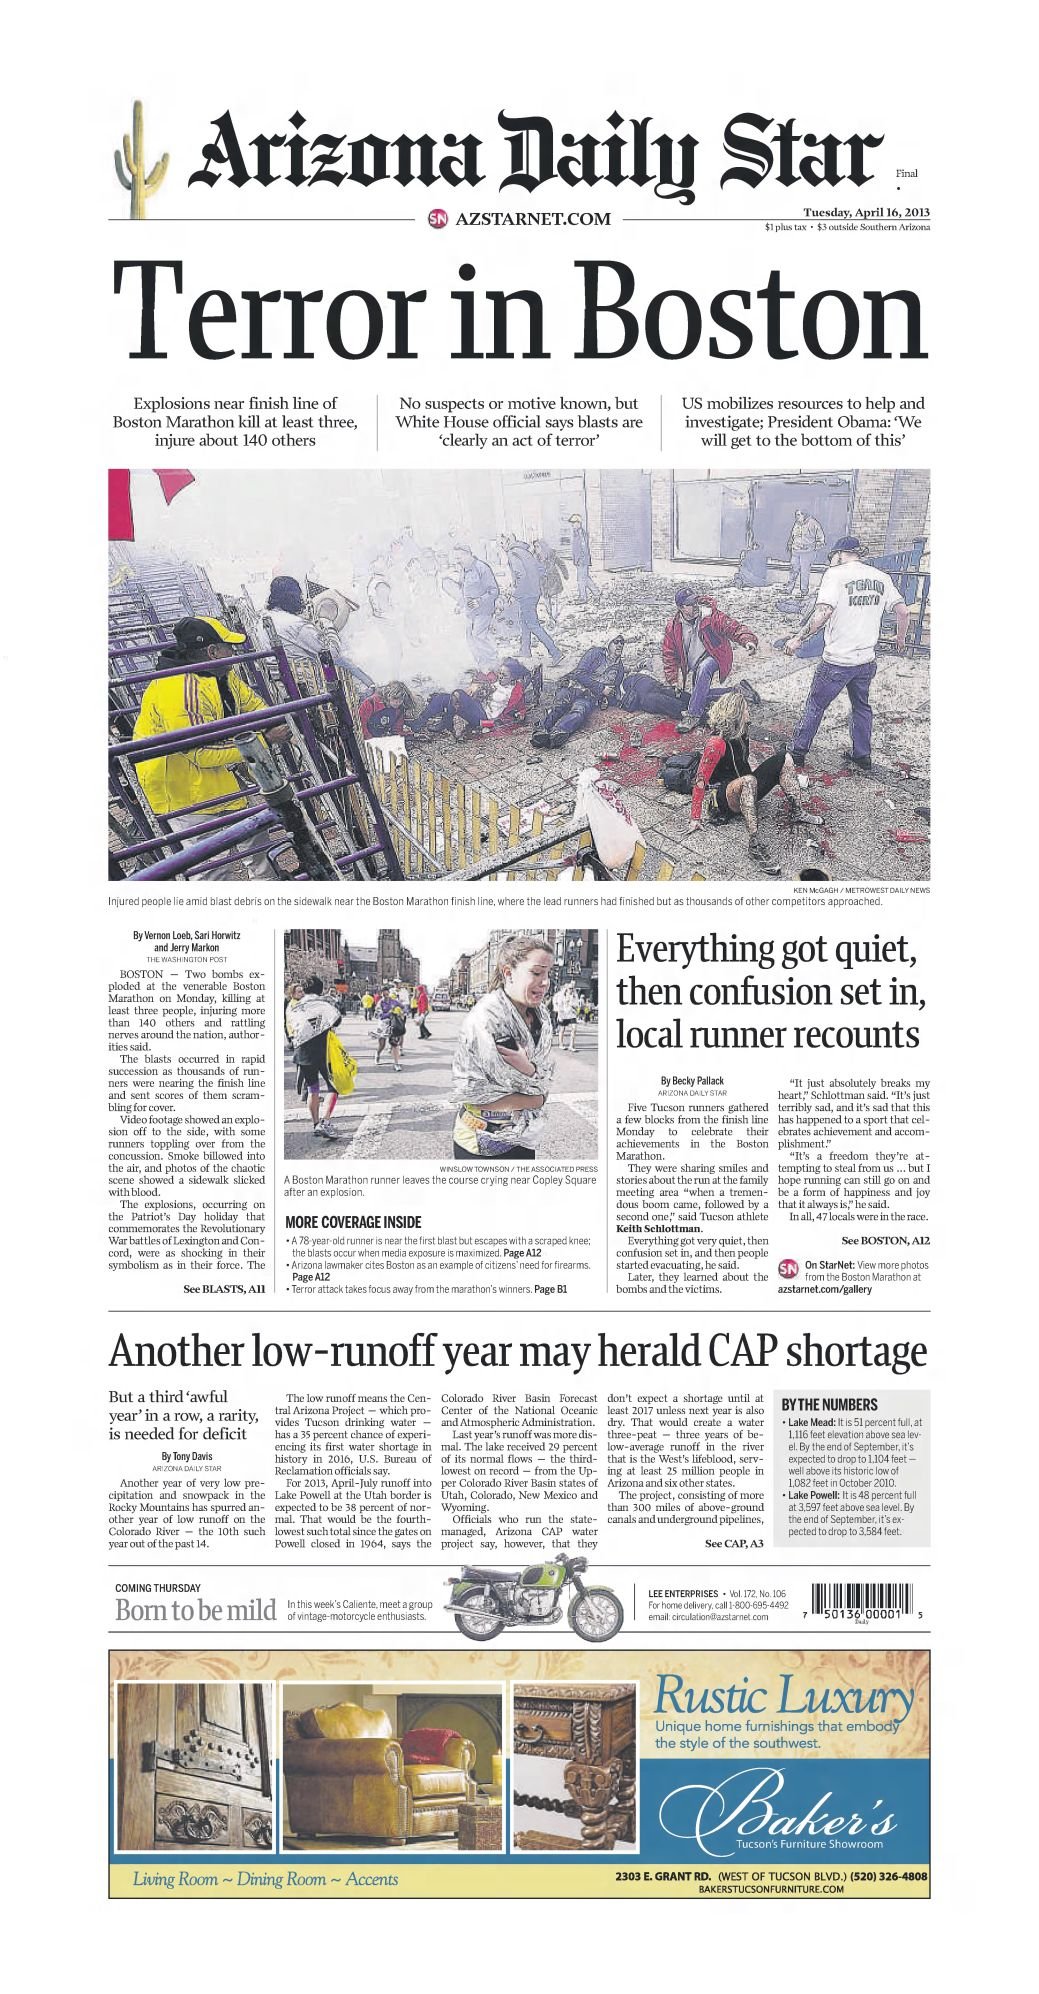 Historical April 16 Arizona Daily Star front pages